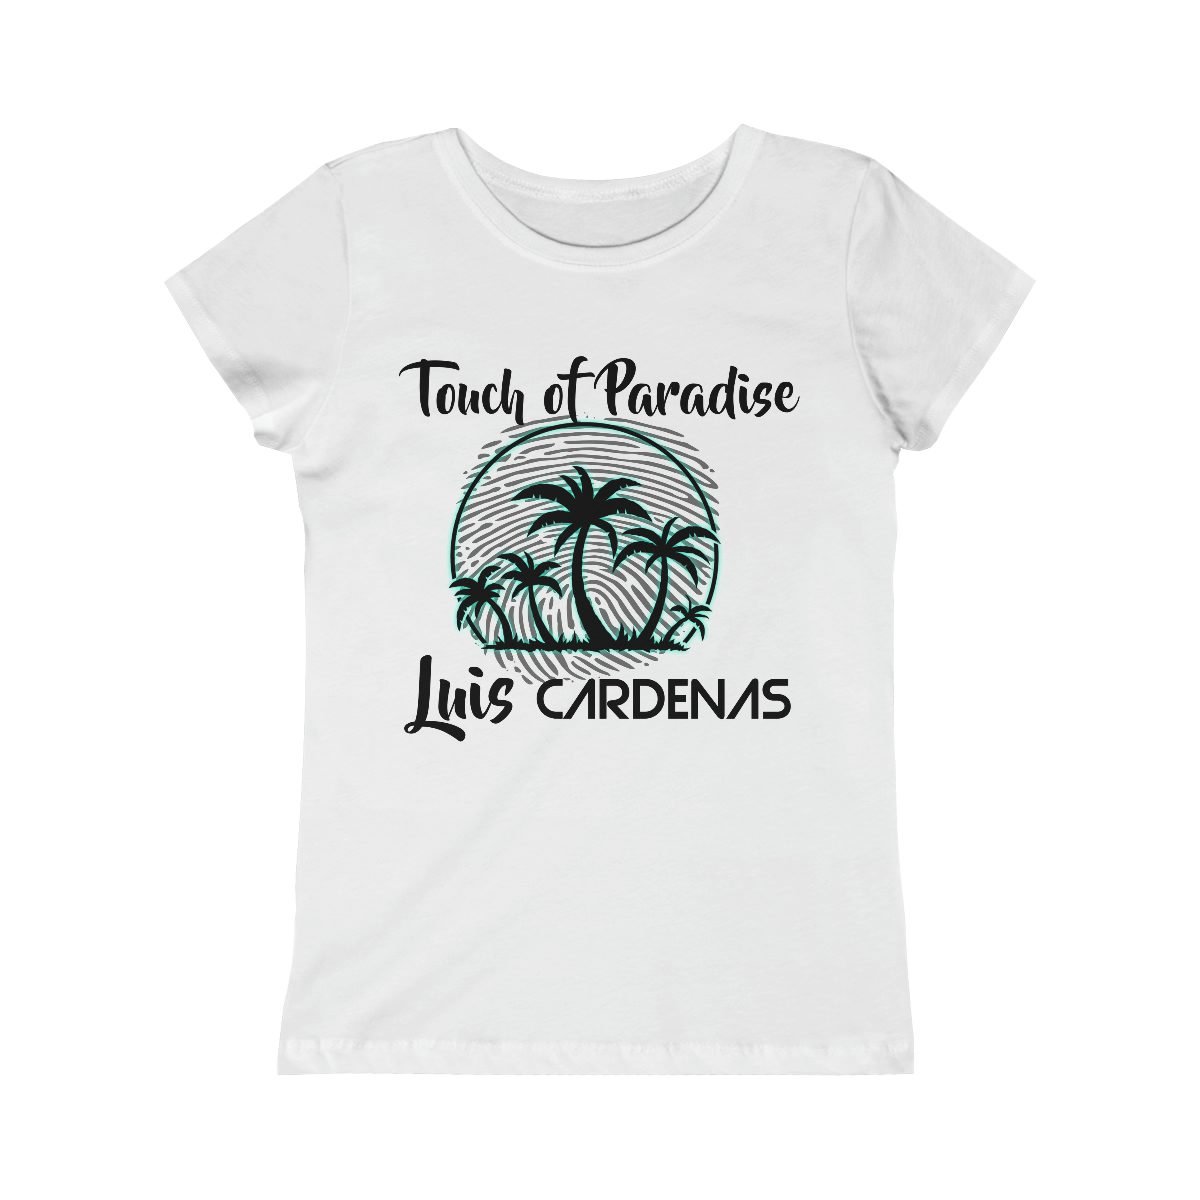 Luis Cardenas – Touch of Paradise Girls Short Sleeve Tshirt